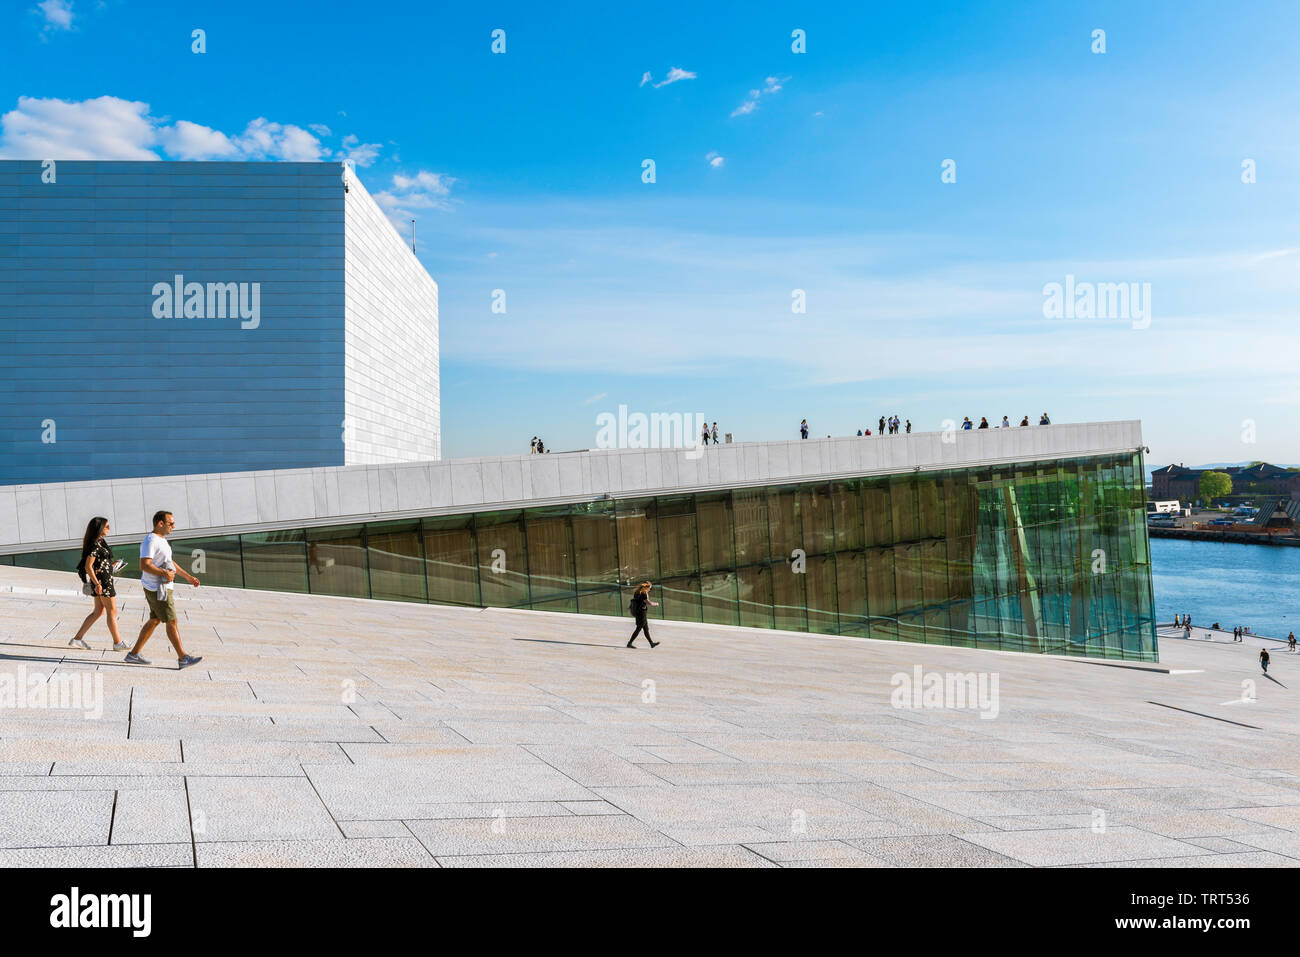 Opera House Oslo, view in summer of people walking on the vast access ramp leading to the roof of the Oslo Opera House. Stock Photo